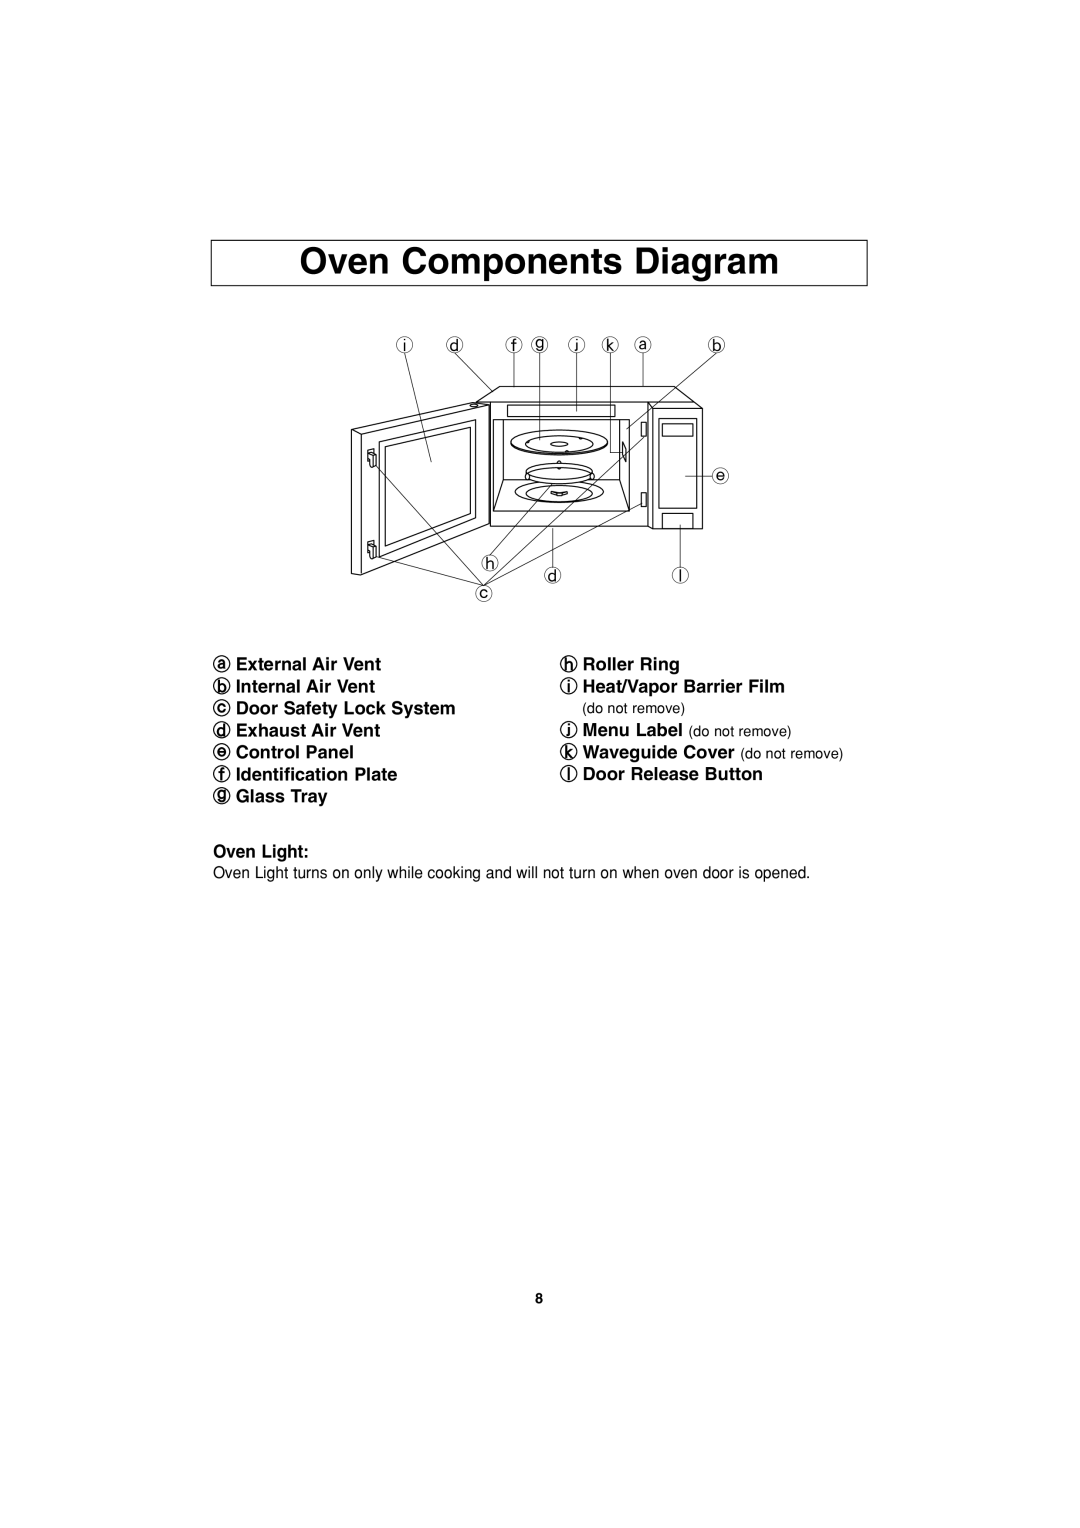 Panasonic NN-S443 important safety instructions Oven Components Diagram 